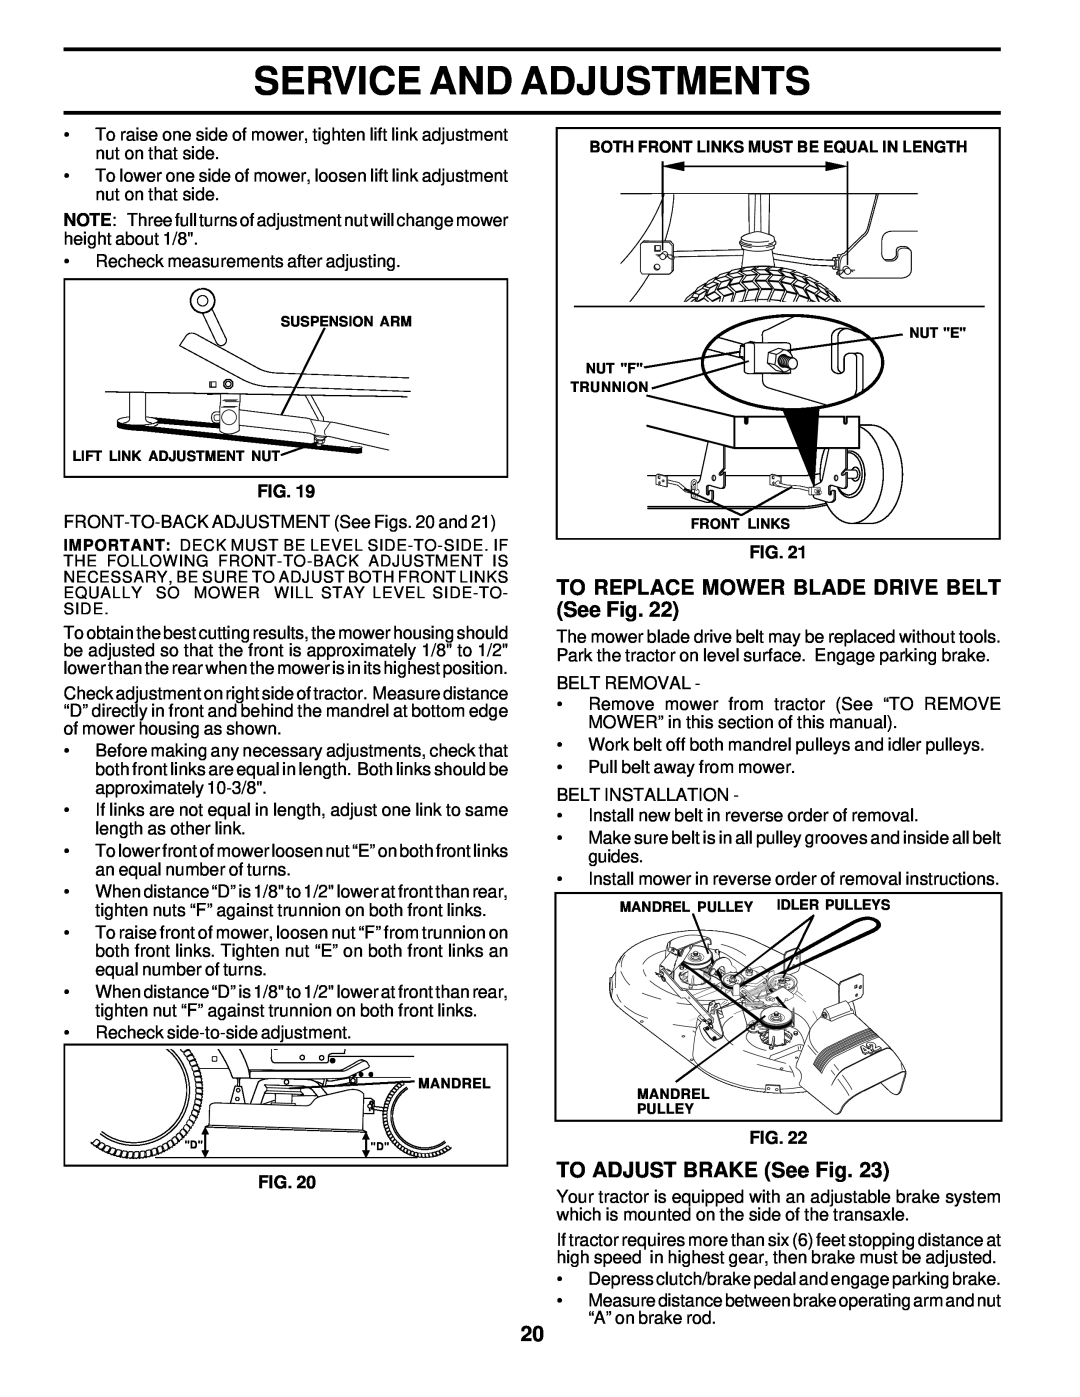 Poulan 176085 owner manual TO REPLACE MOWER BLADE DRIVE BELT See Fig, TO ADJUST BRAKE See Fig, Service And Adjustments 